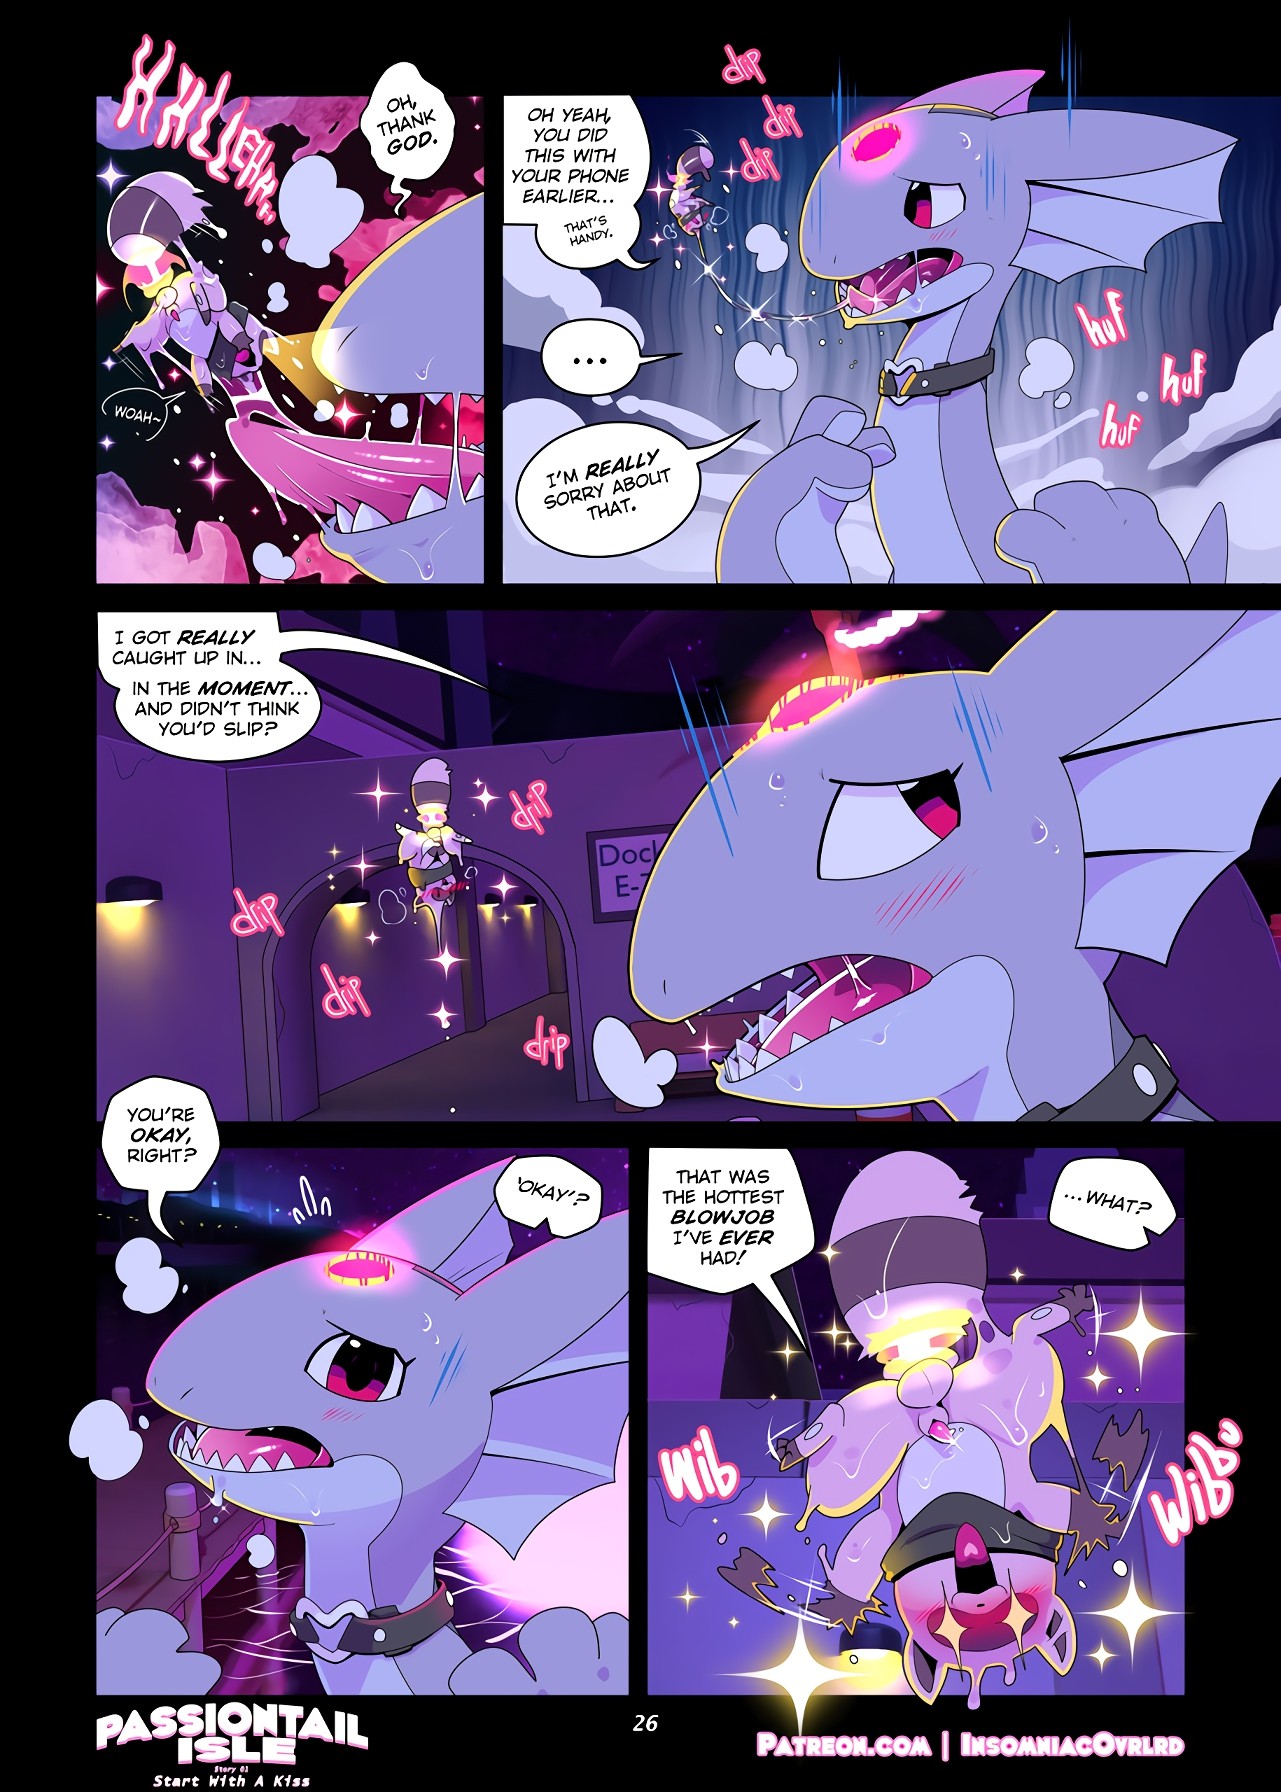 Passiontail Isle by Insomniacovrlrd porn comic picture 28